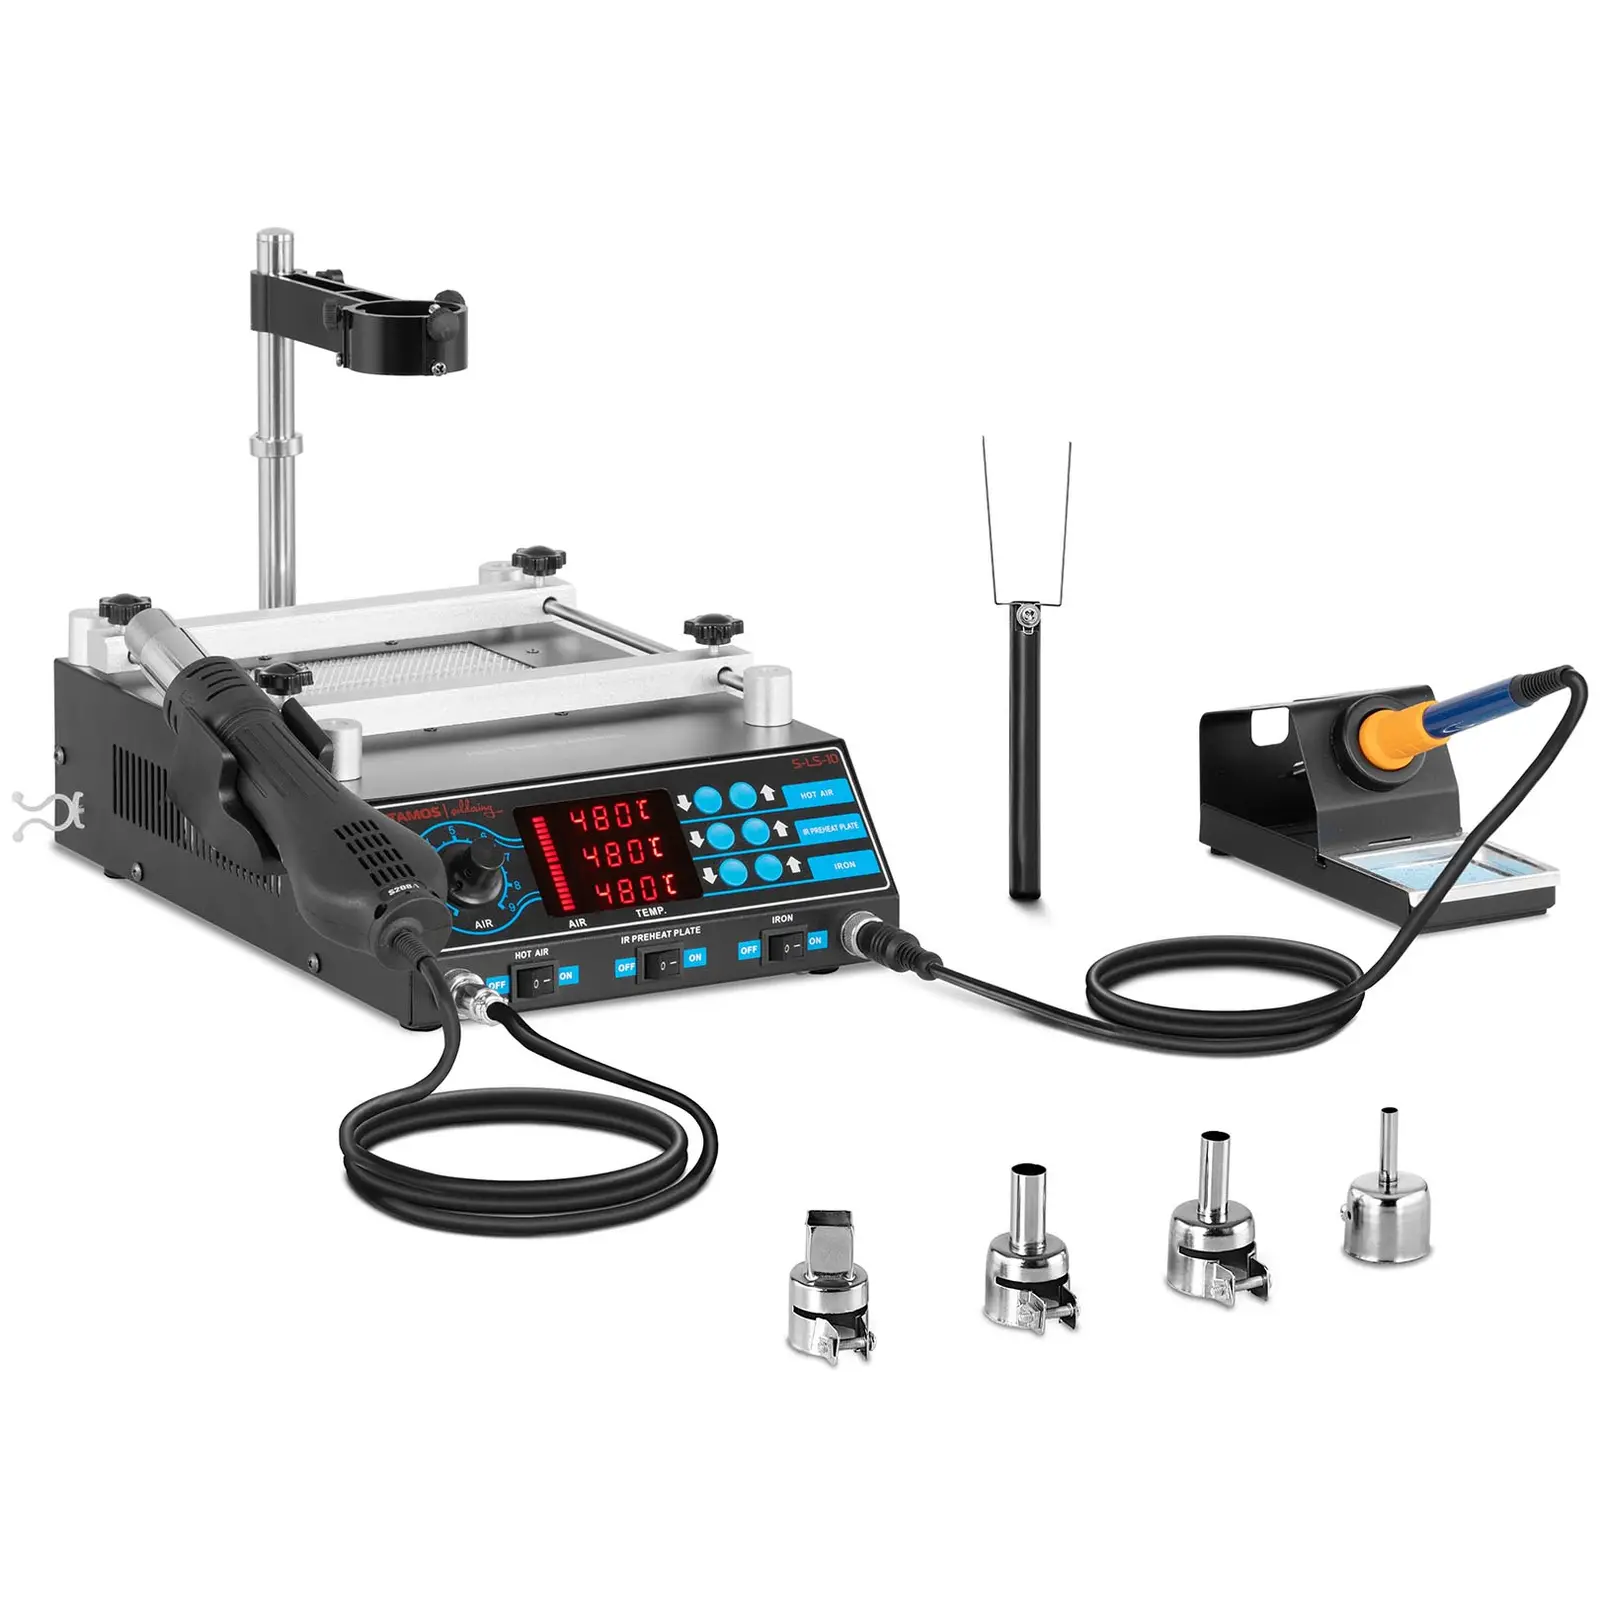 Soldering Station with Pre-Heater and 2 Racks – Basic